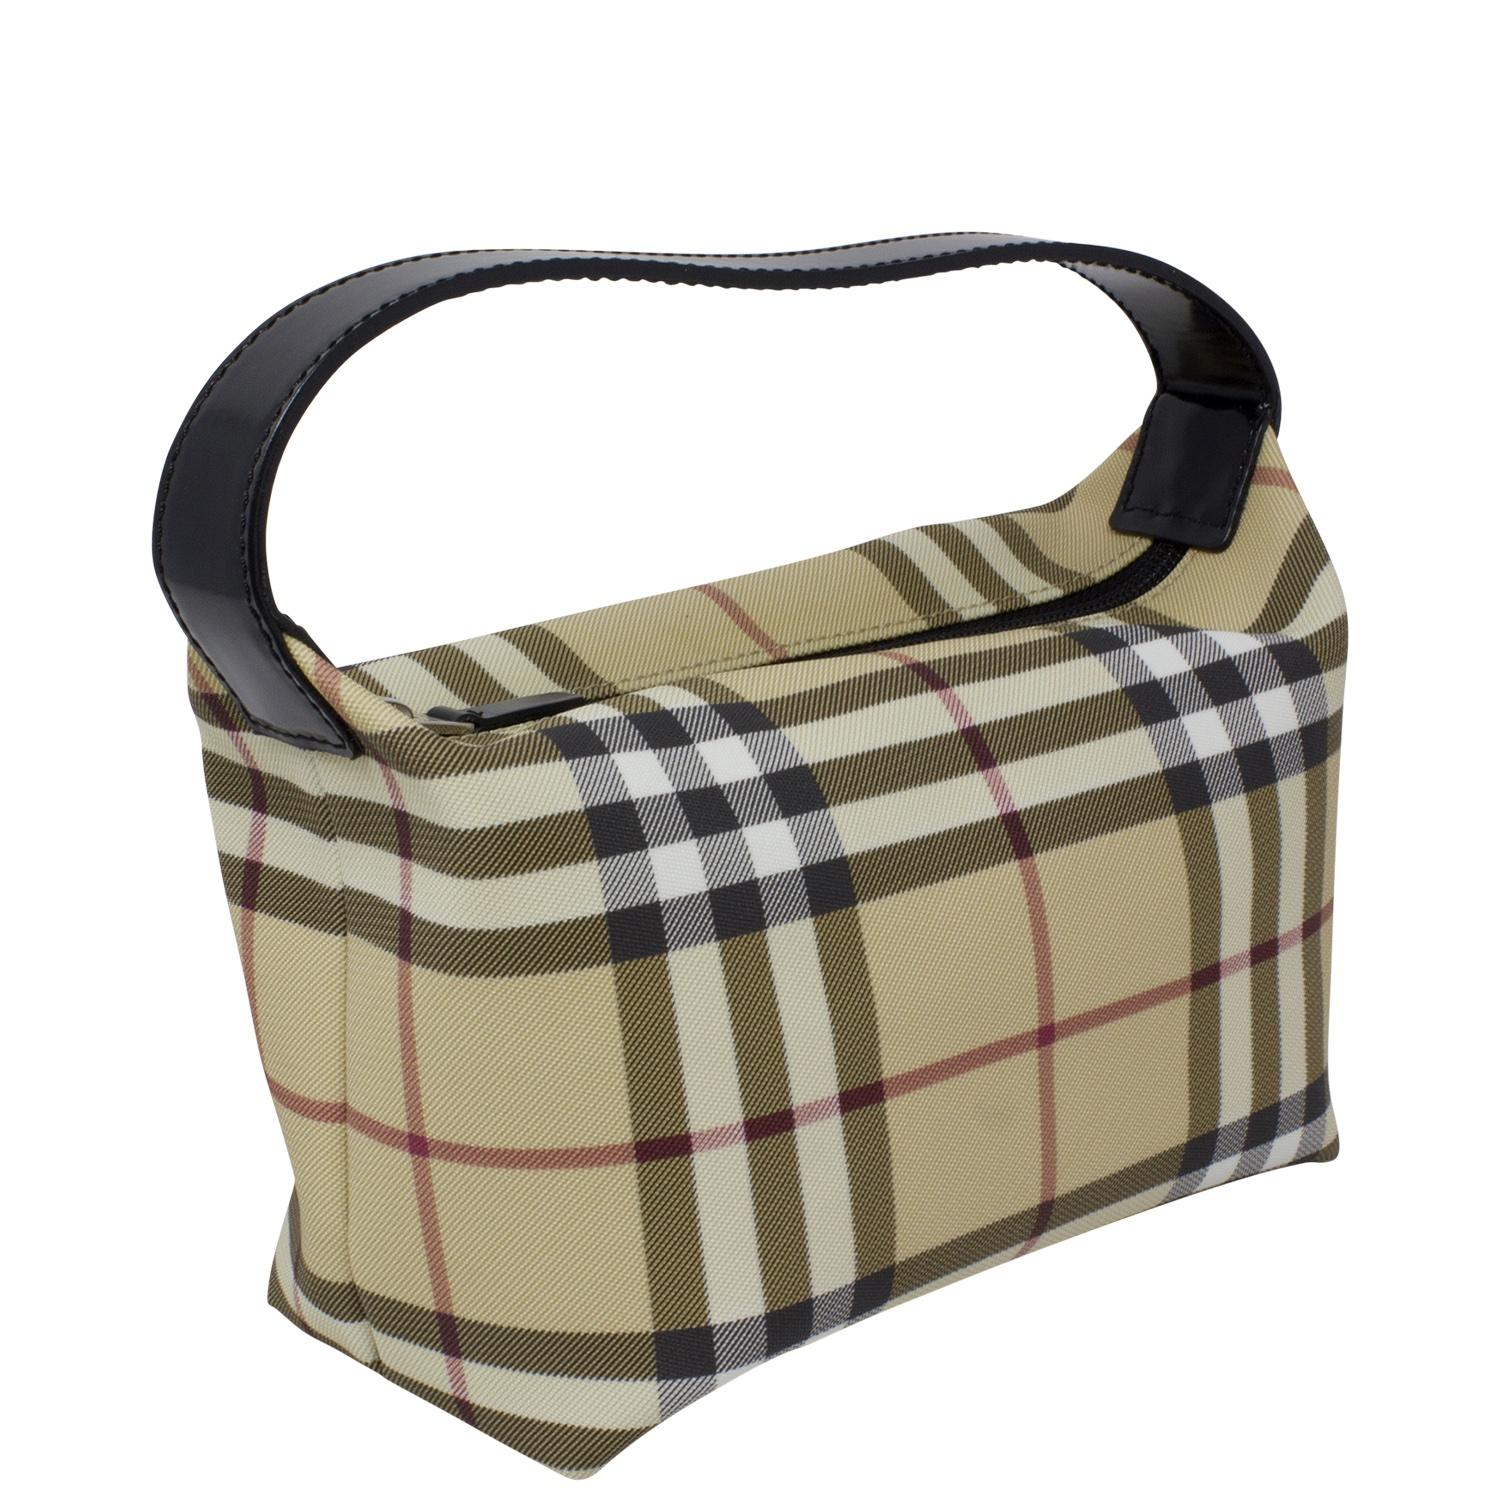 Burberry plaid is back ladies and gents! We love this classic cutie piece with such a perfect petite silhouette. Perfect for summer but works year round. Rendered in the classic Burberry check plaid print in coated canvas, black patent leather flat